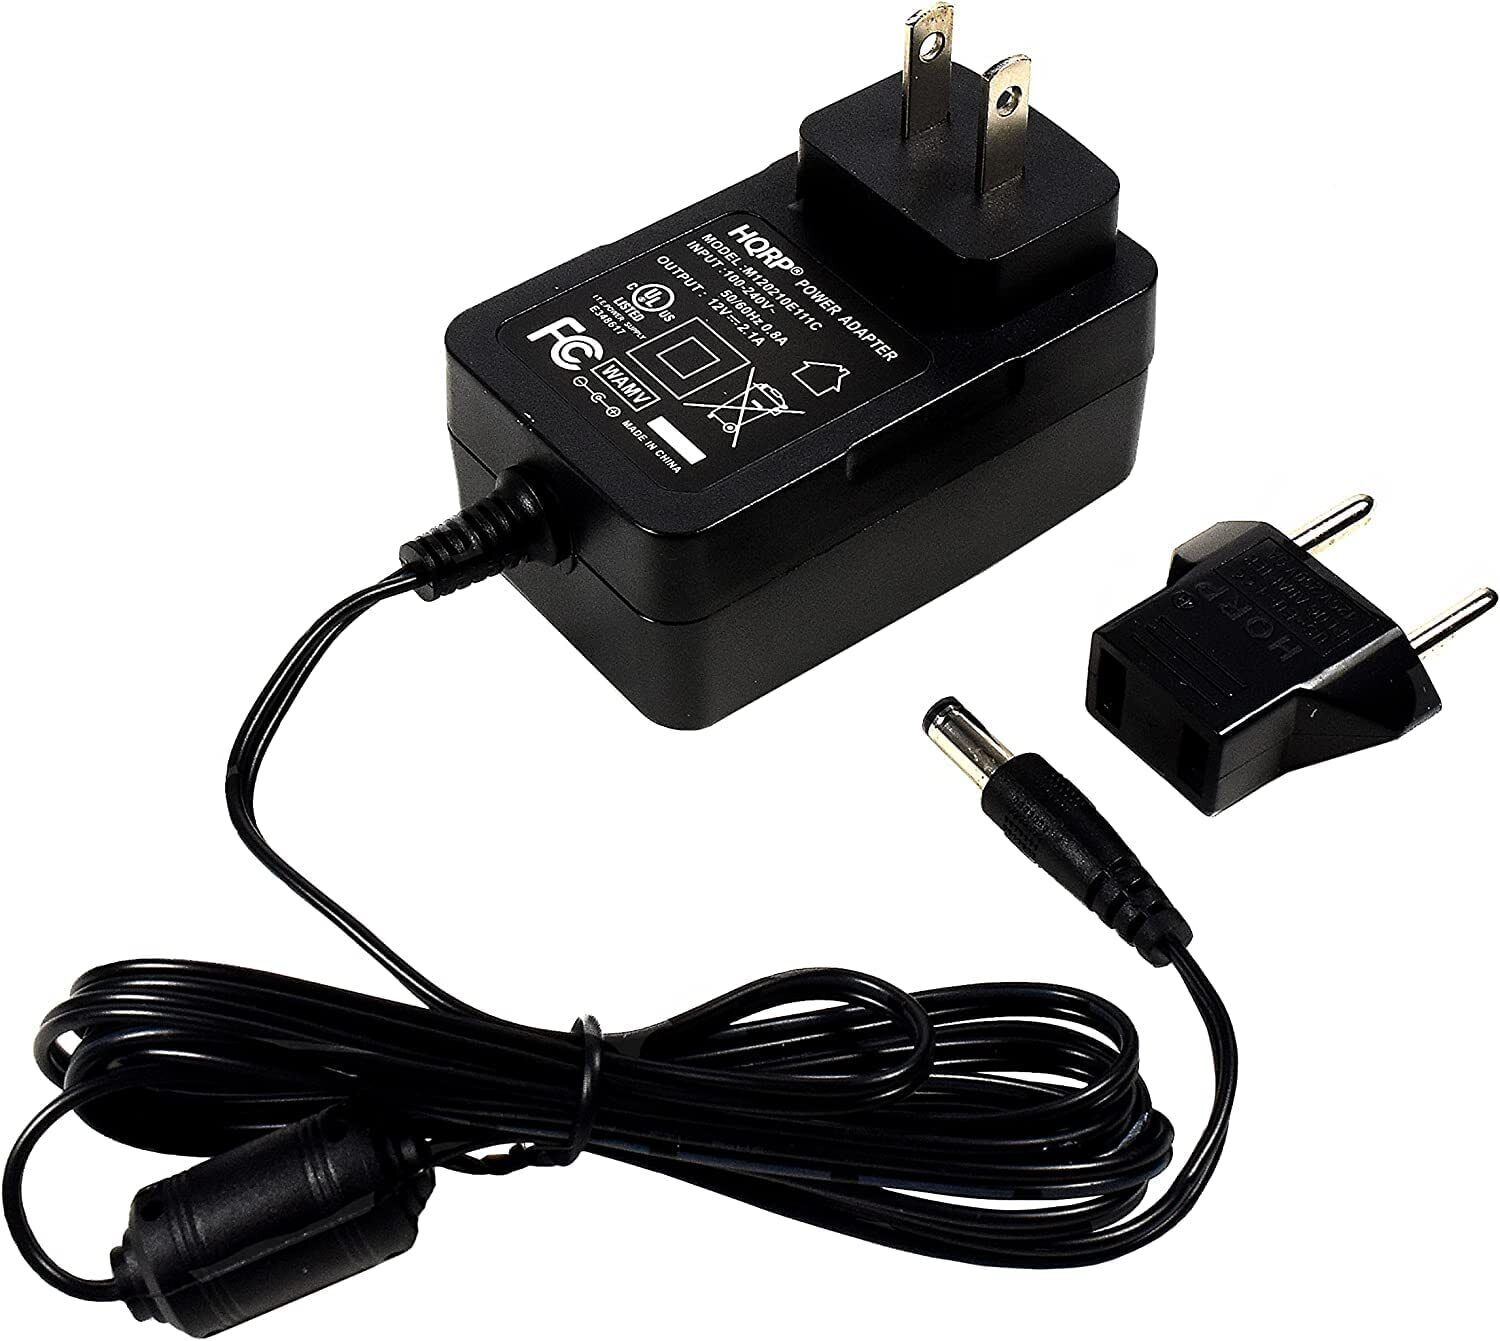 AC Power Adapter for WD My Book Expander Live Cloud Studio Series Elements 1224G